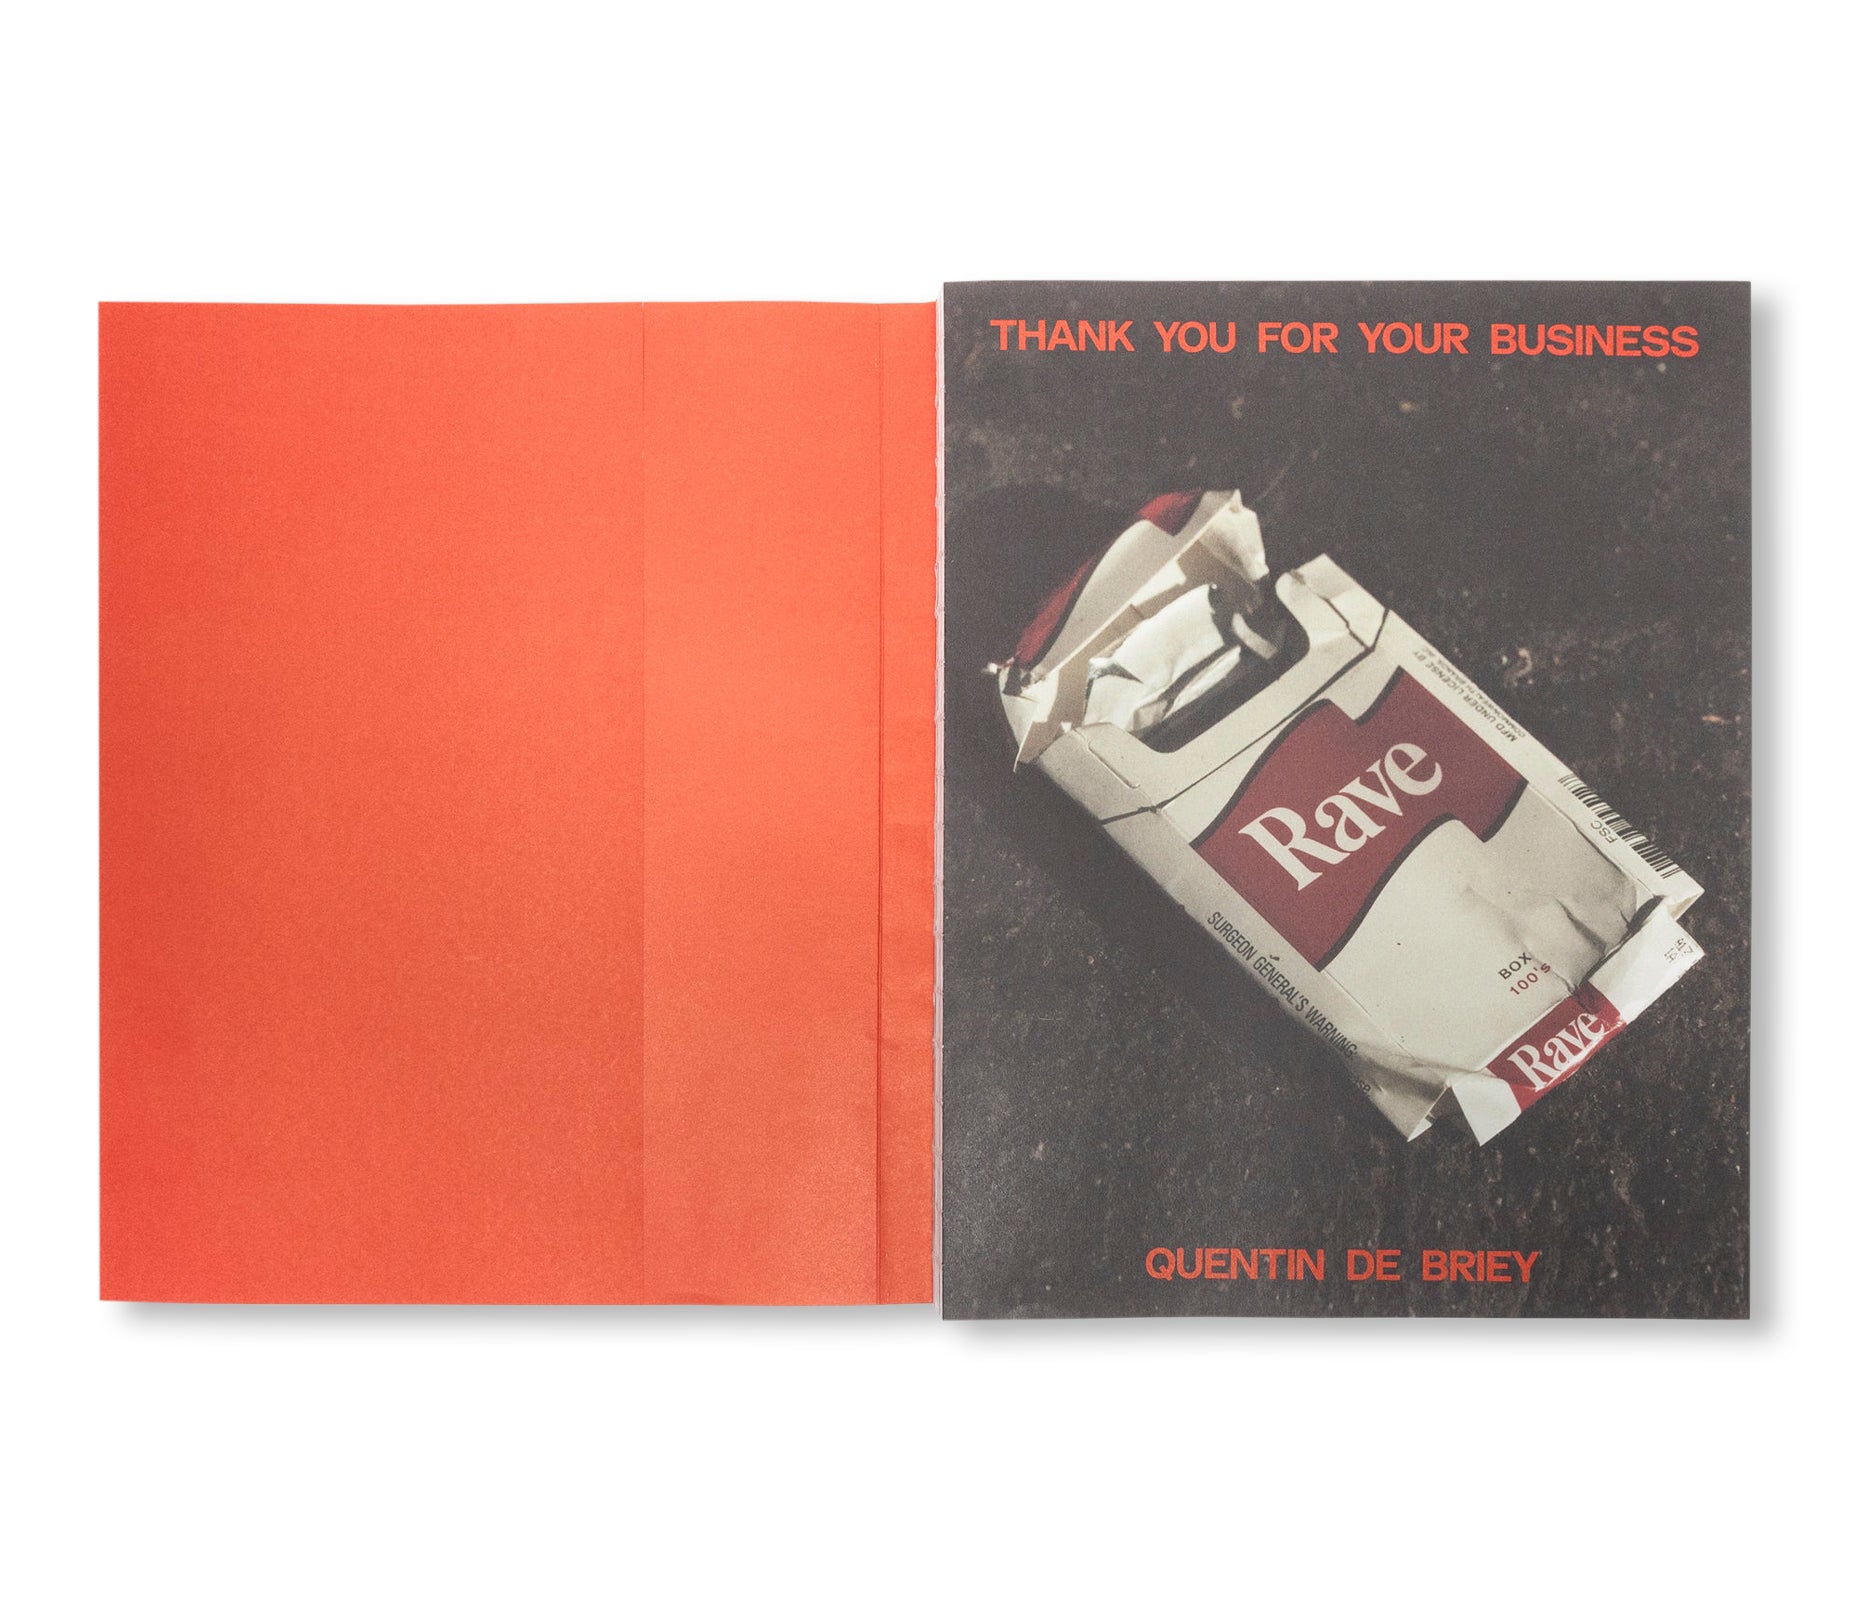 THANK YOU FOR YOUR BUSINESS by Quentin de Briey [FIRST EDITION]